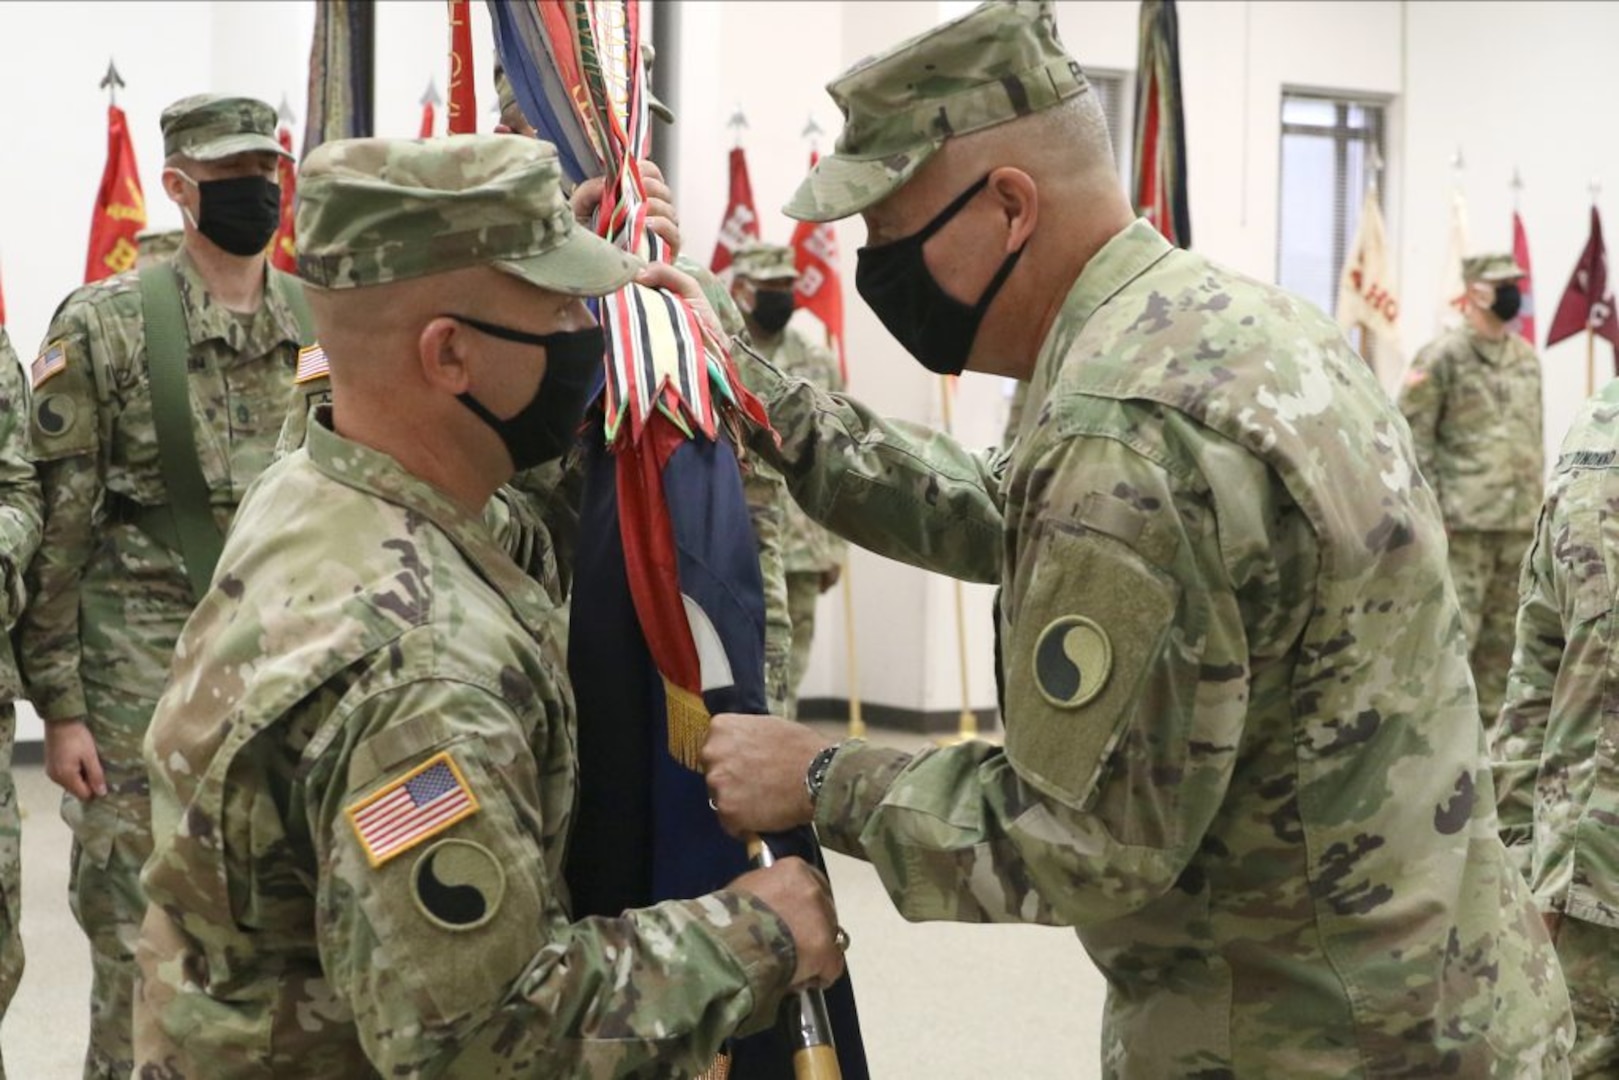 Col. Christopher J. Samulski takes command of the Staunton-based 116th Infantry Brigade Combat Team from Col. Joseph A. DiNonno July 31, 2020, at Fort Pickett, Virginia.